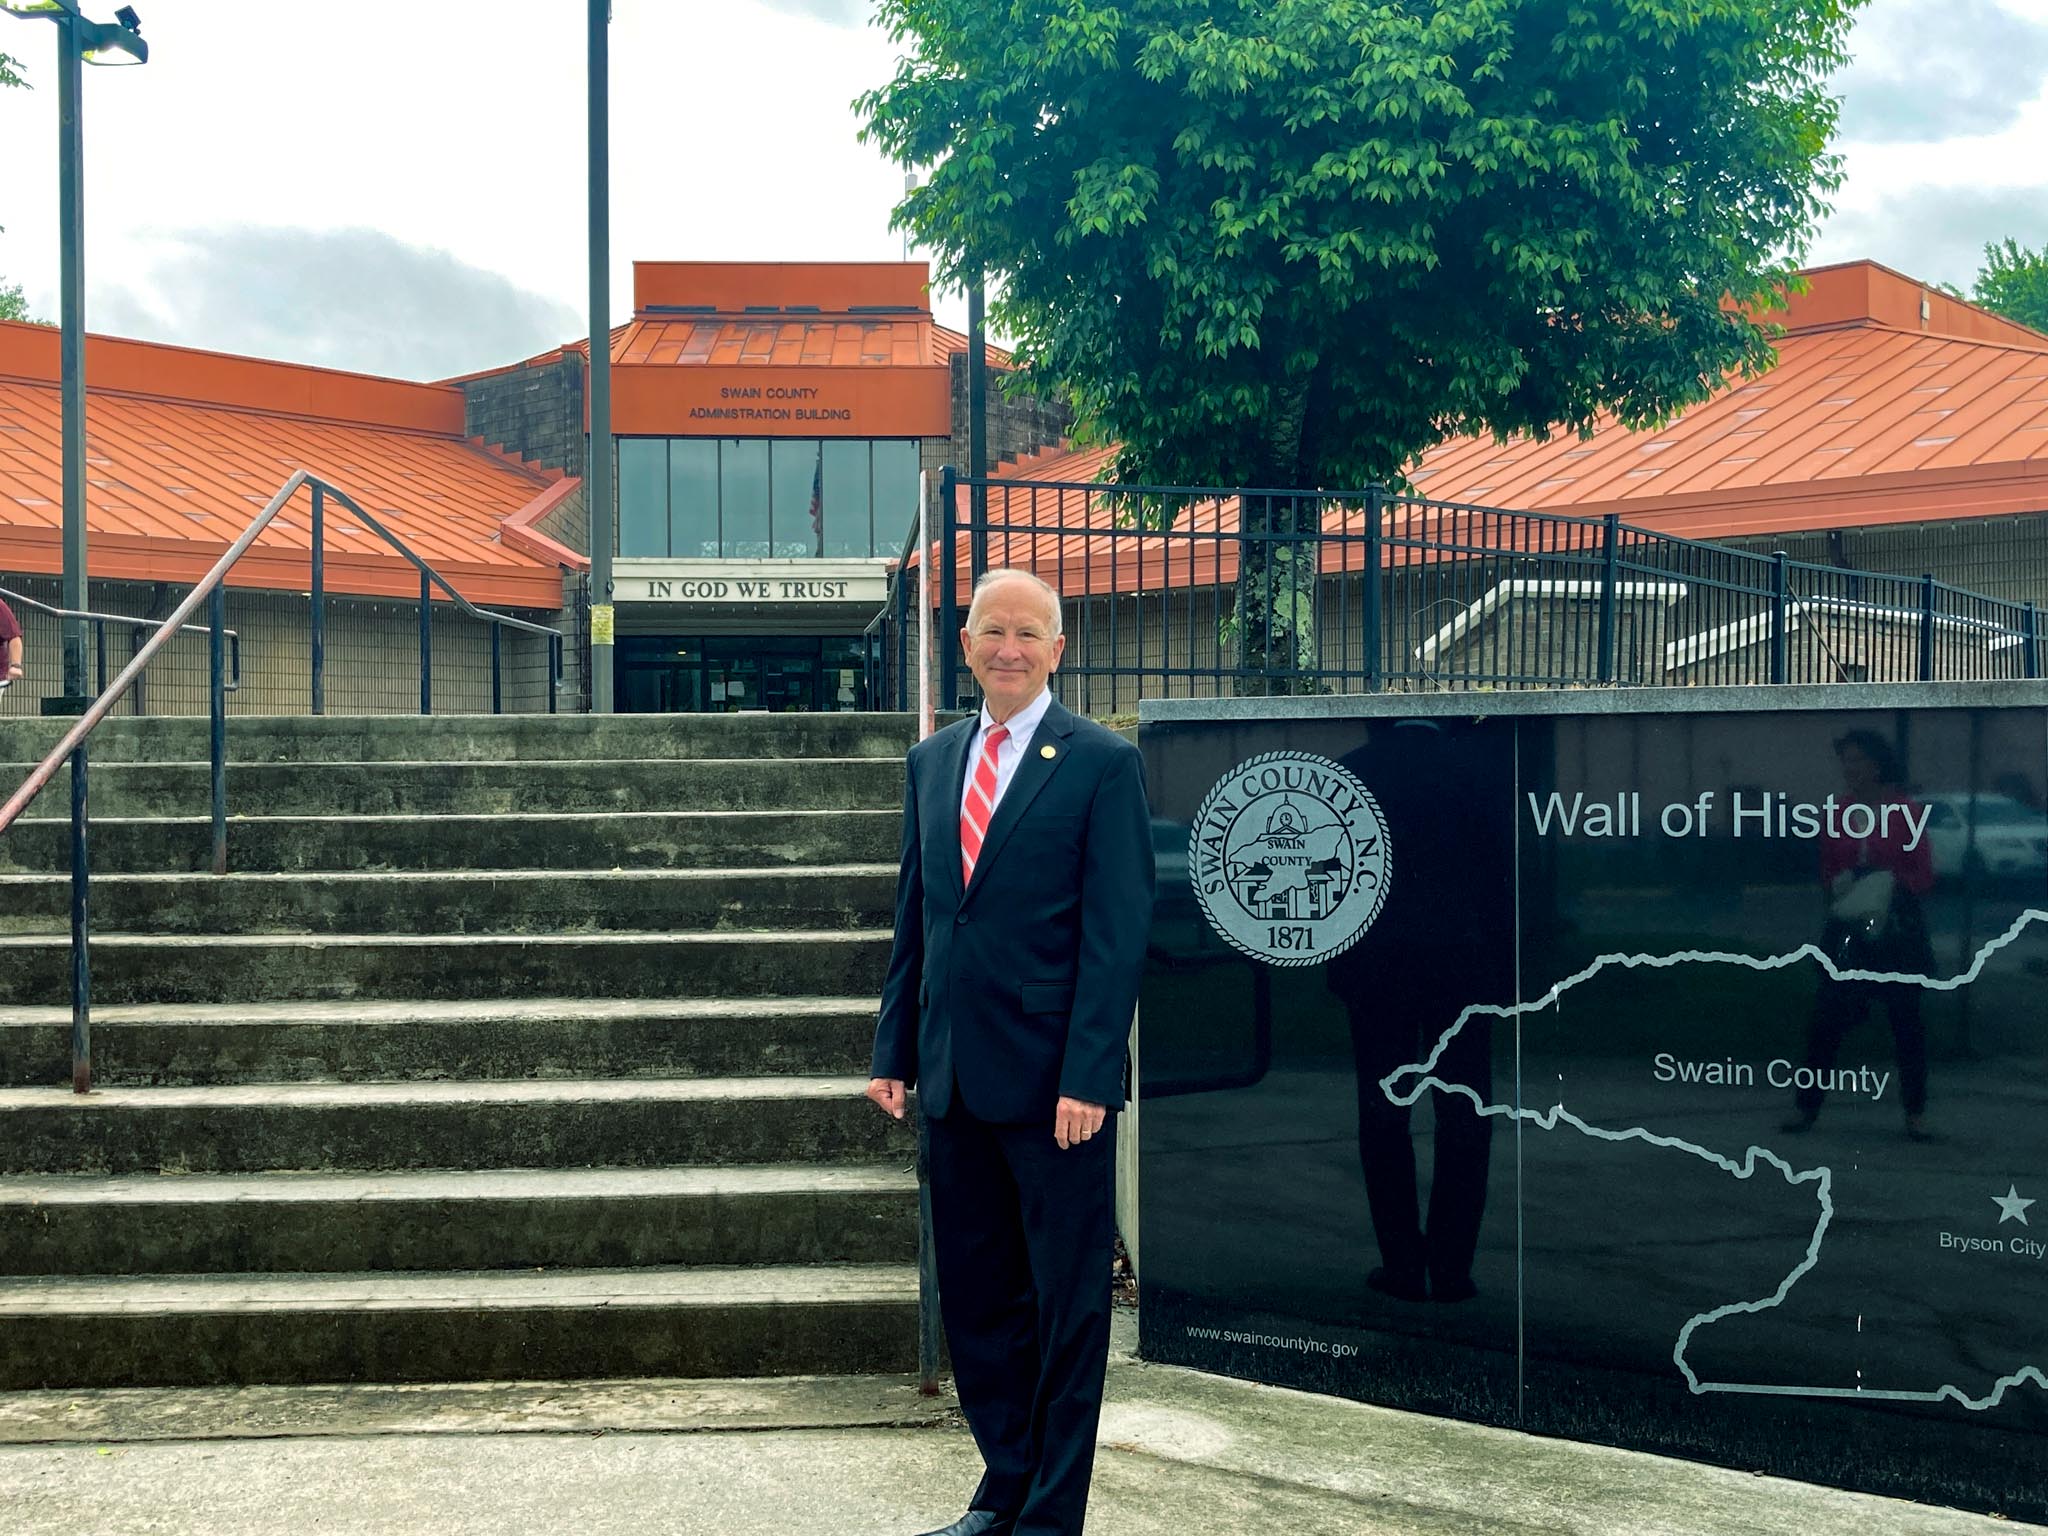 Chief Justice Paul Newby in front of the Swain County Superior Court in Bryson City, North Carolina